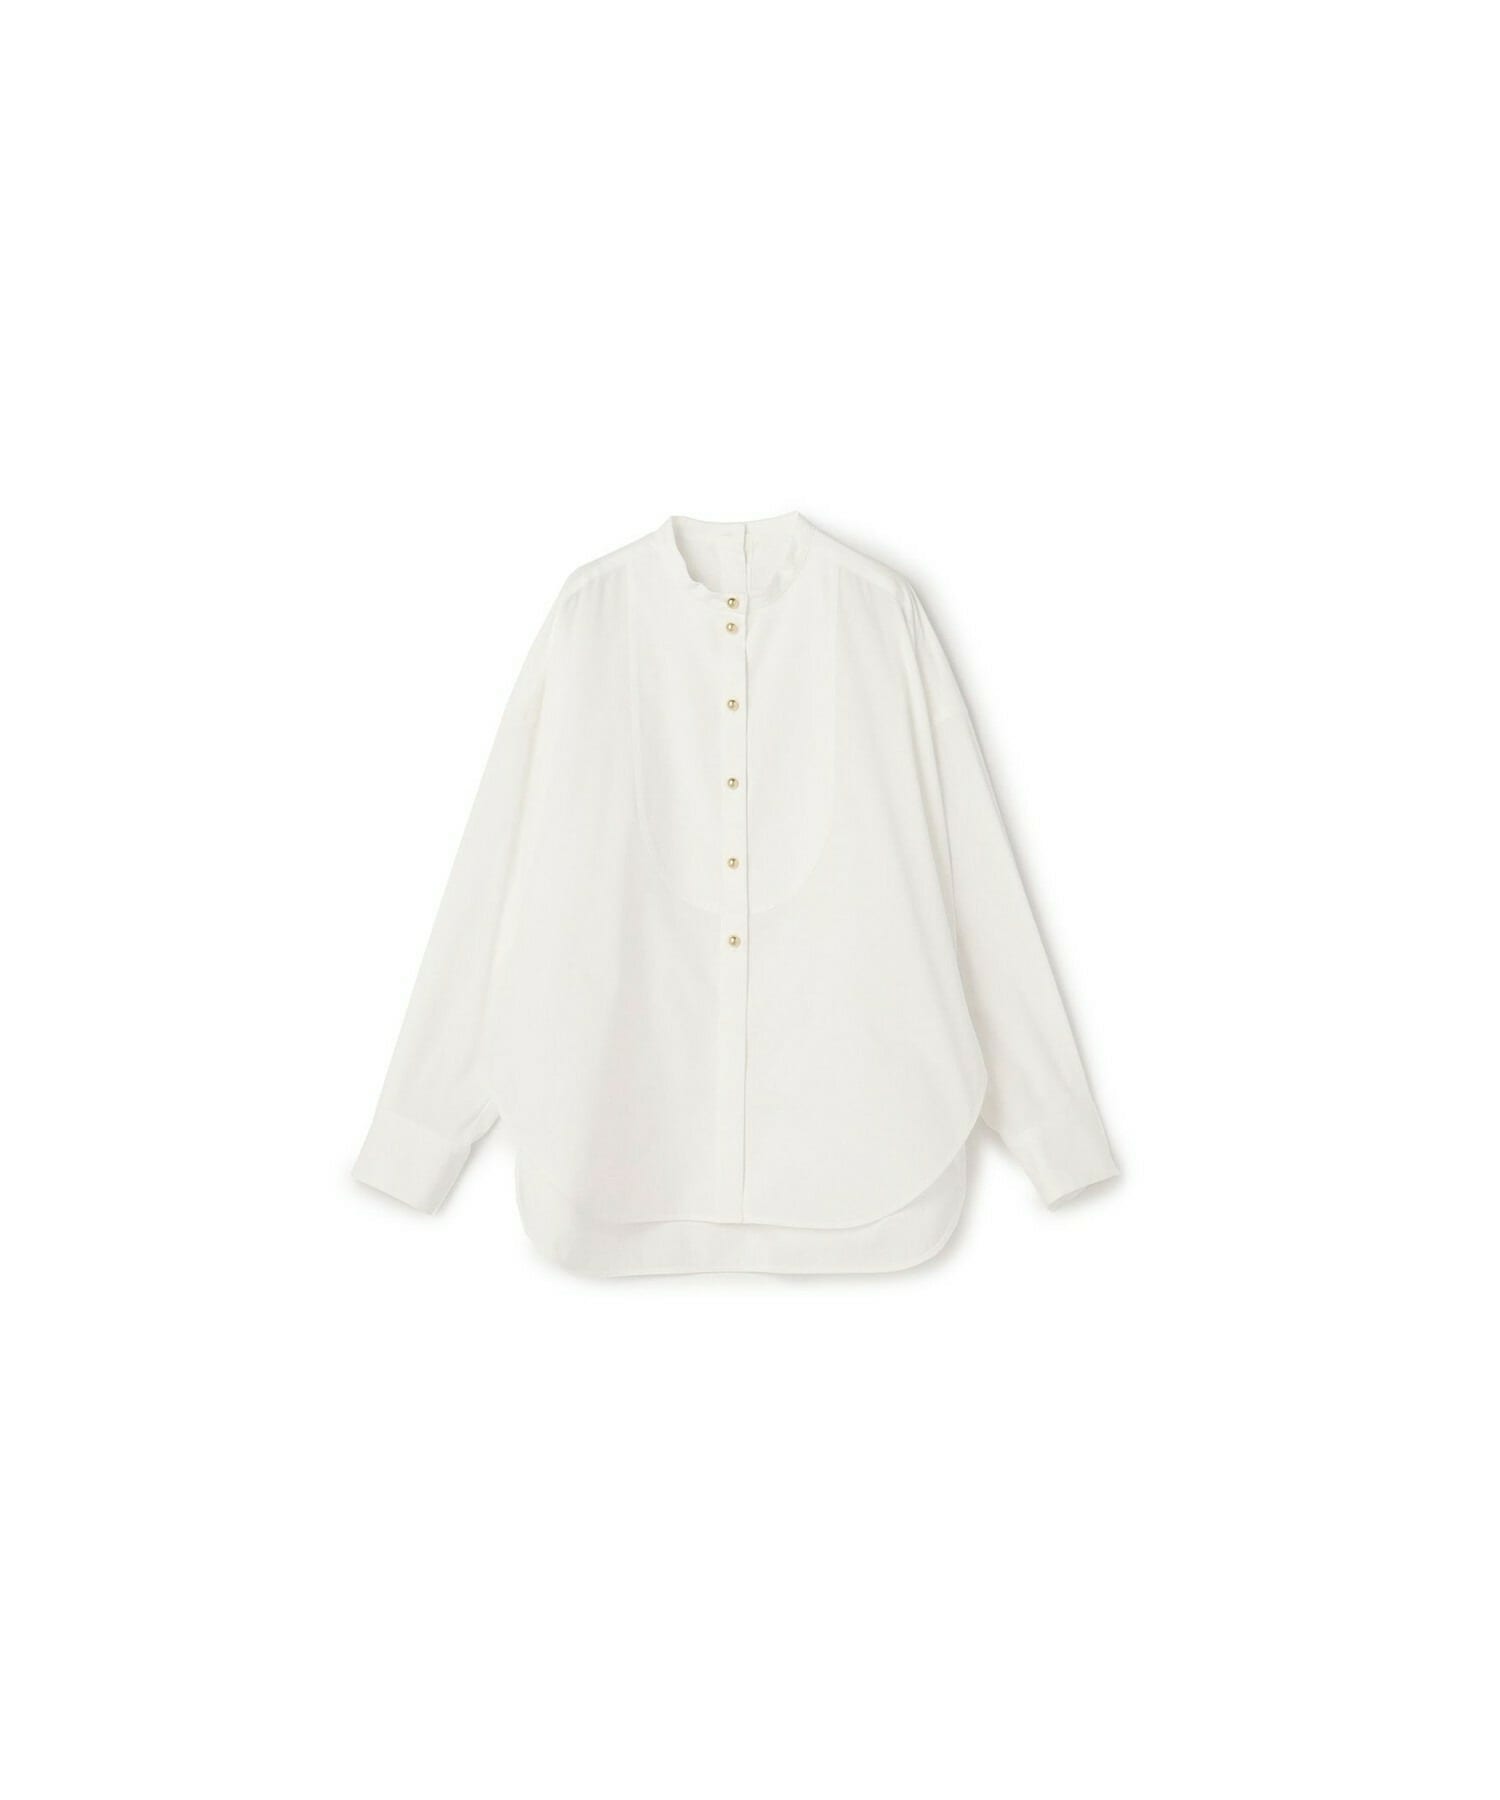 【yoshie inaba】STRETCH COTTON BROAD NARROW STAND COLLAR  詳細画像 オフホワイト 1